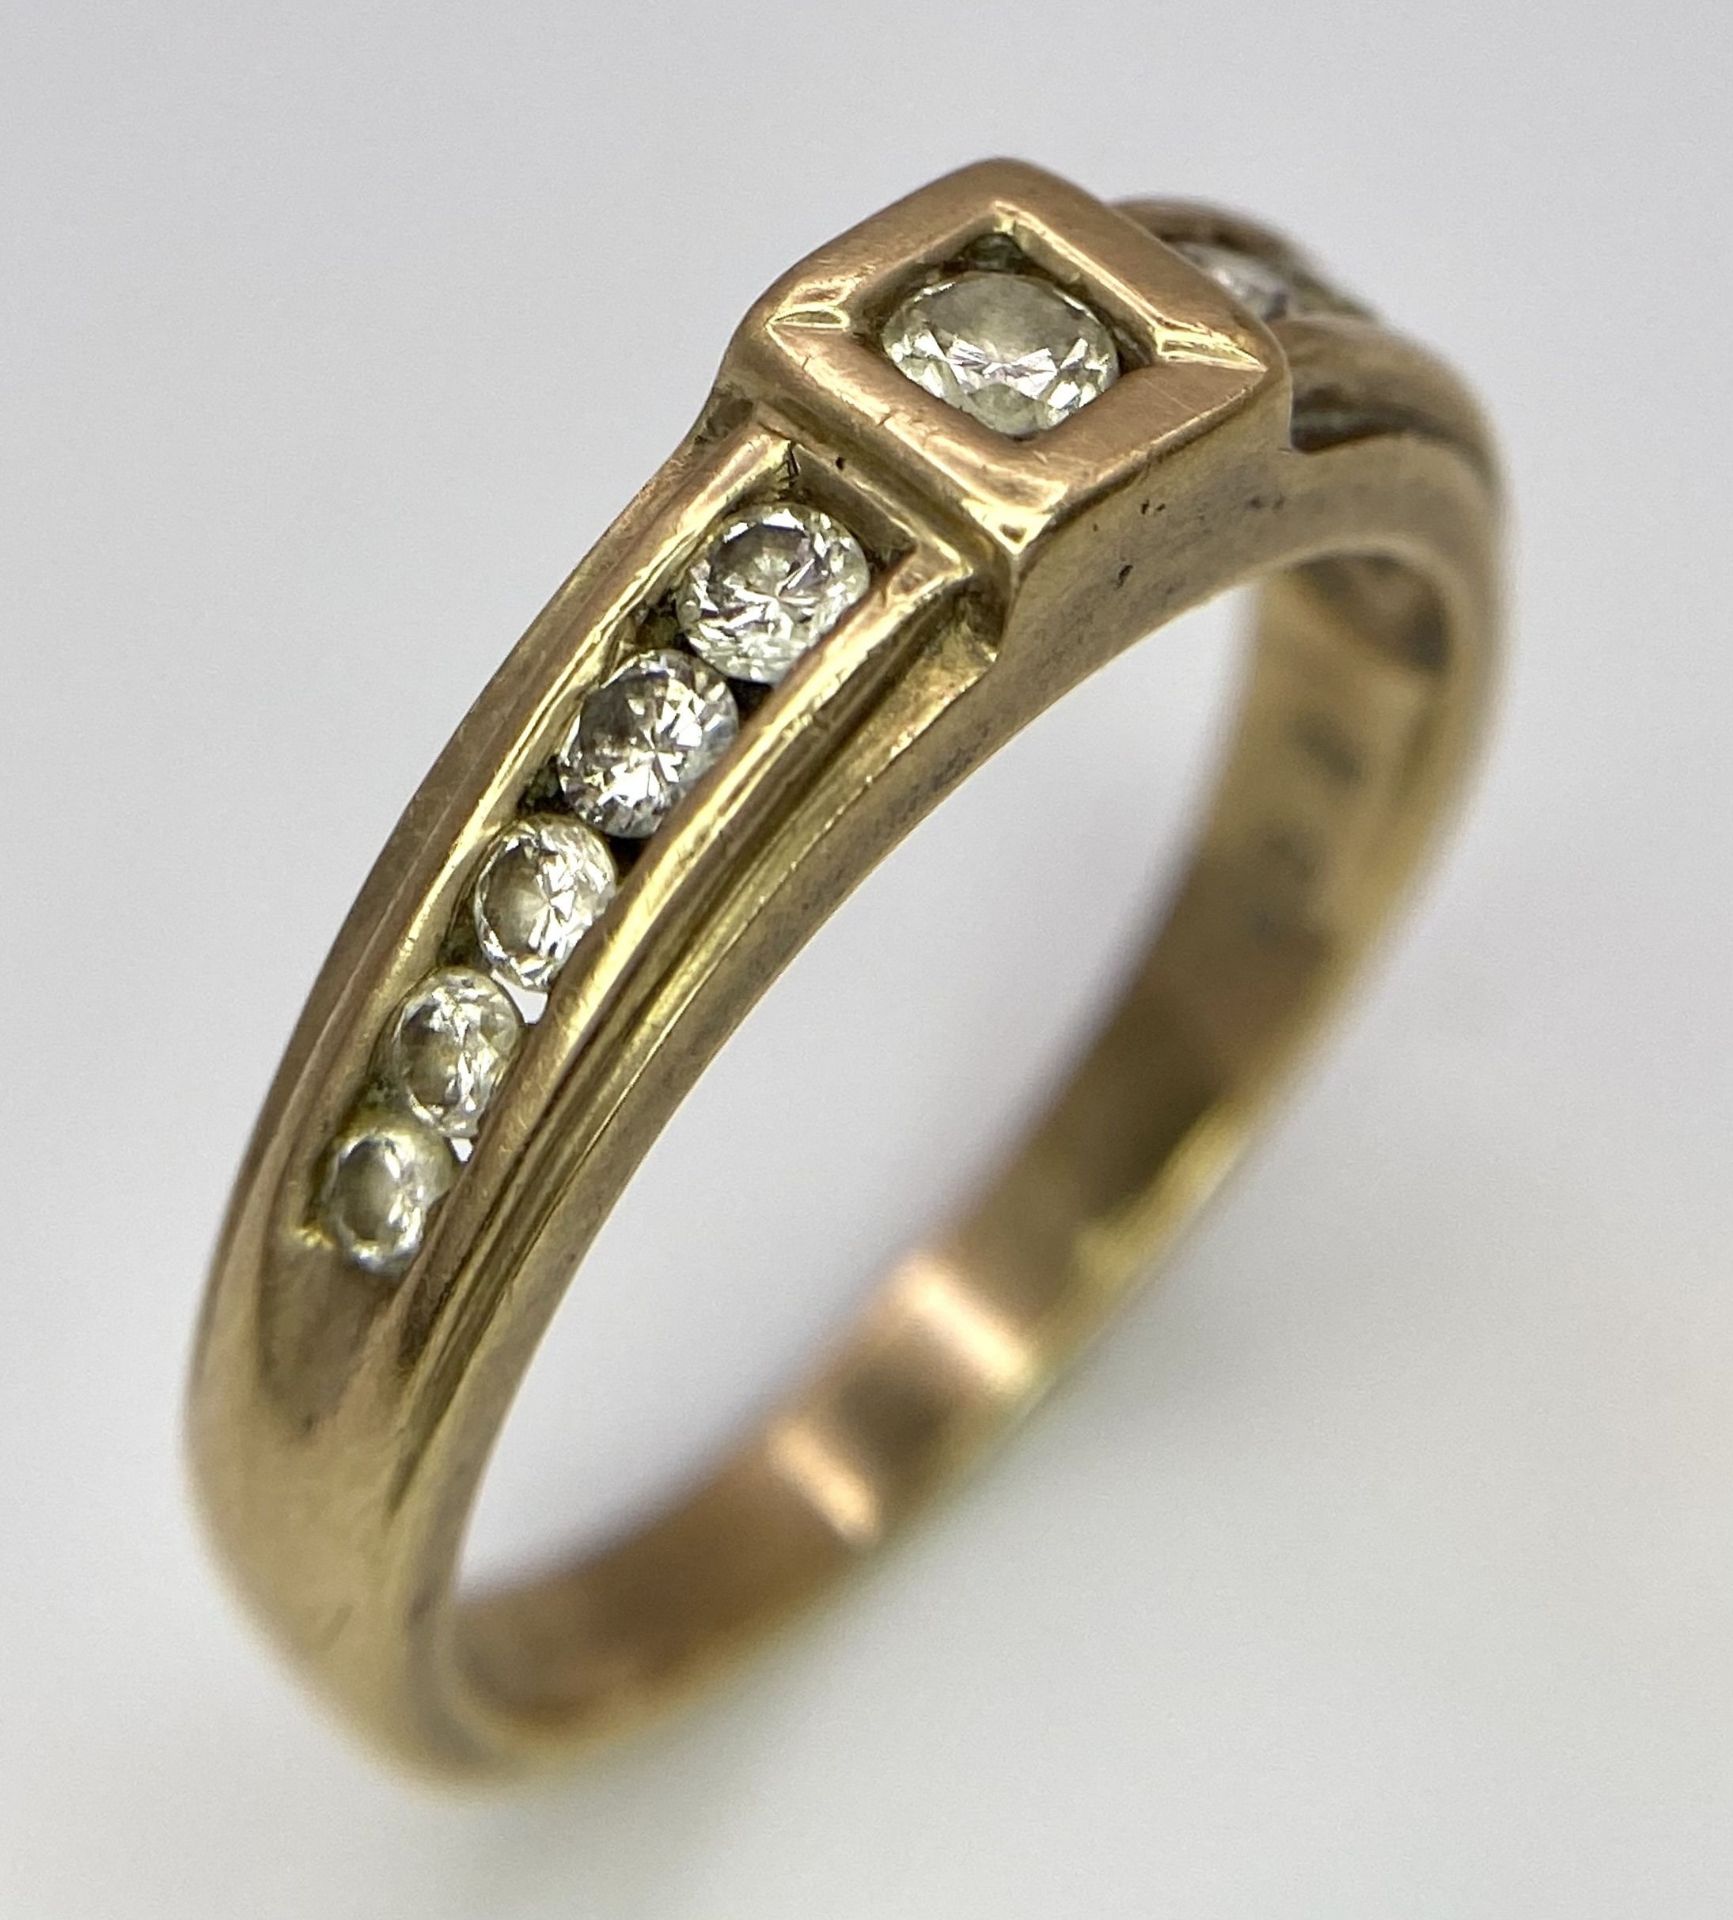 A Vintage 9K Yellow Gold Diamond Half-Eternity Ring. Belt buckle design. Size R. 3.7g total weight. - Image 2 of 6